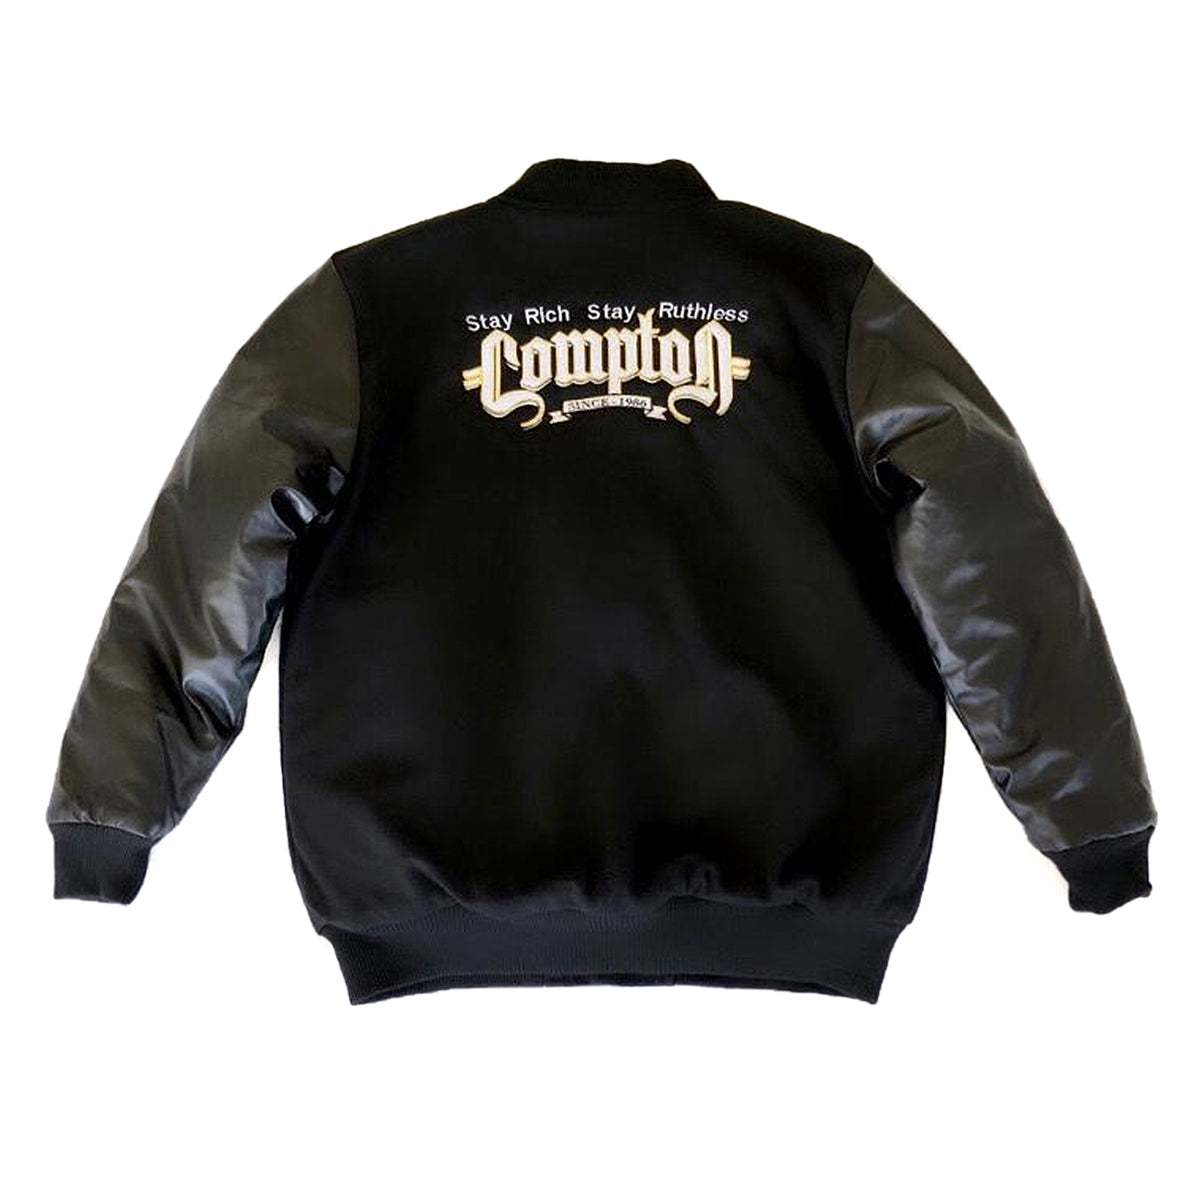 Stay Rich Stay Ruthless (Letterman Jacket Black)